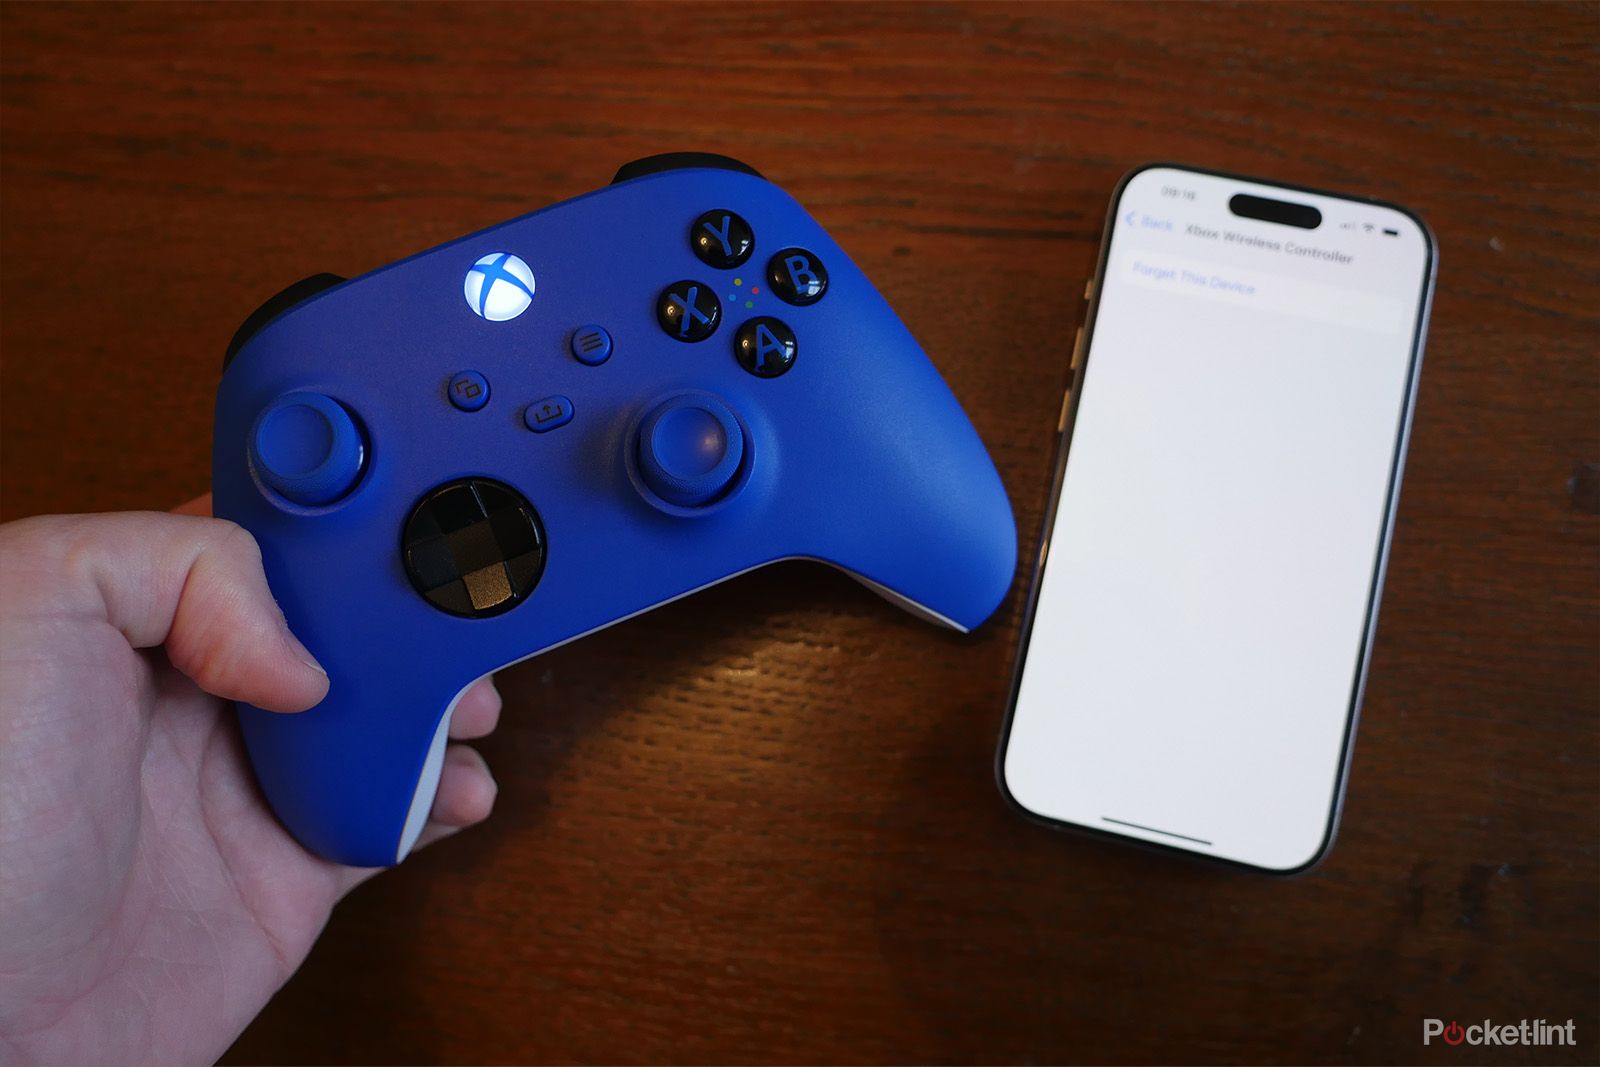 How to connect an Xbox controller to your iPhone